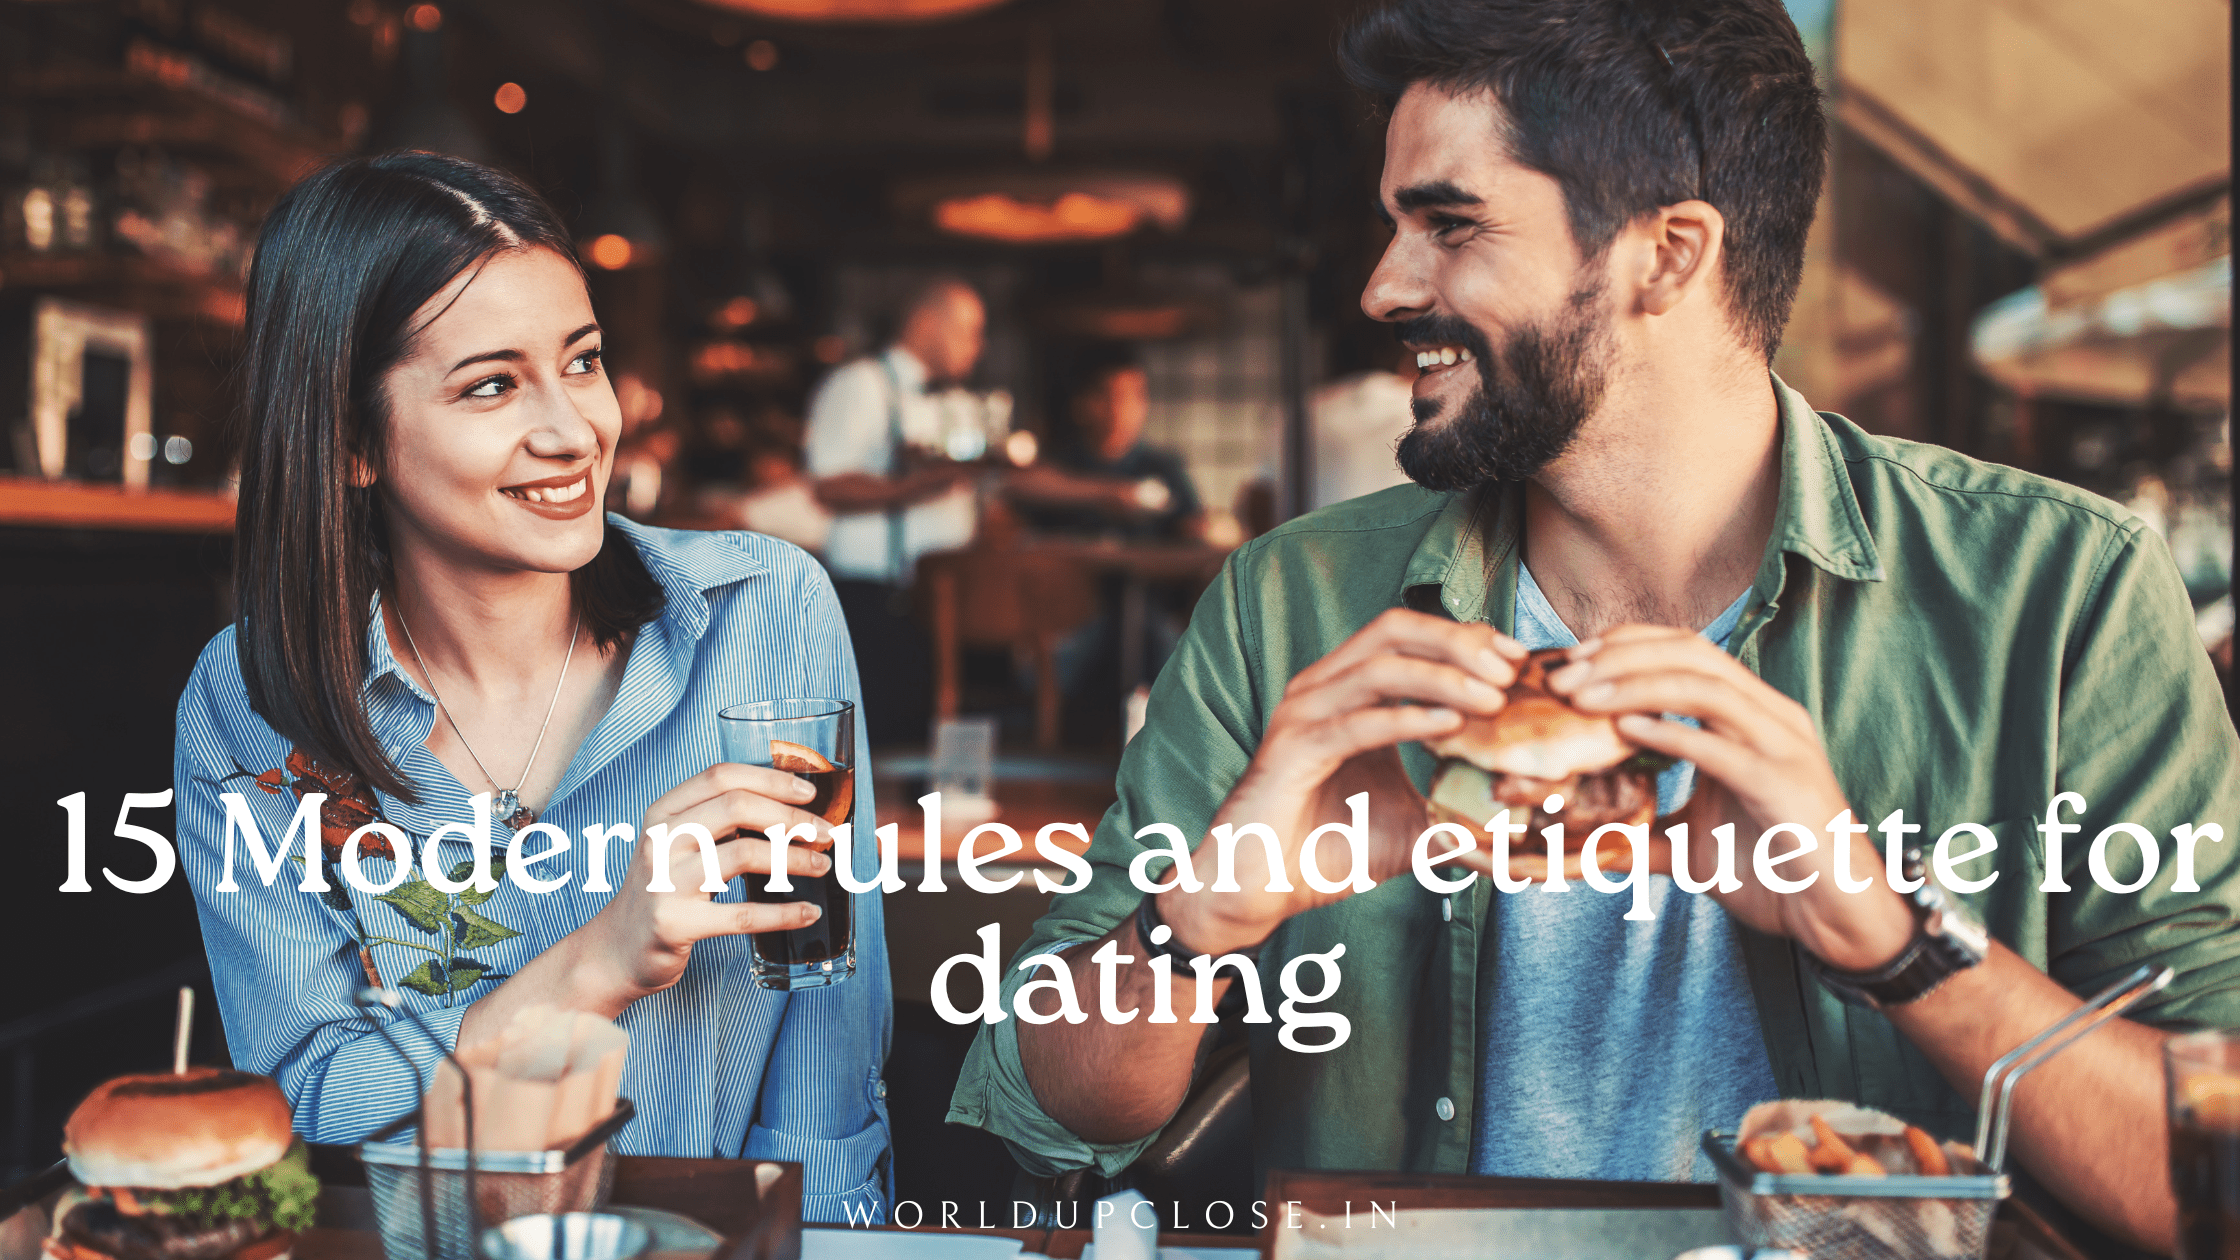 15 Modern rules and etiquette for dating 9